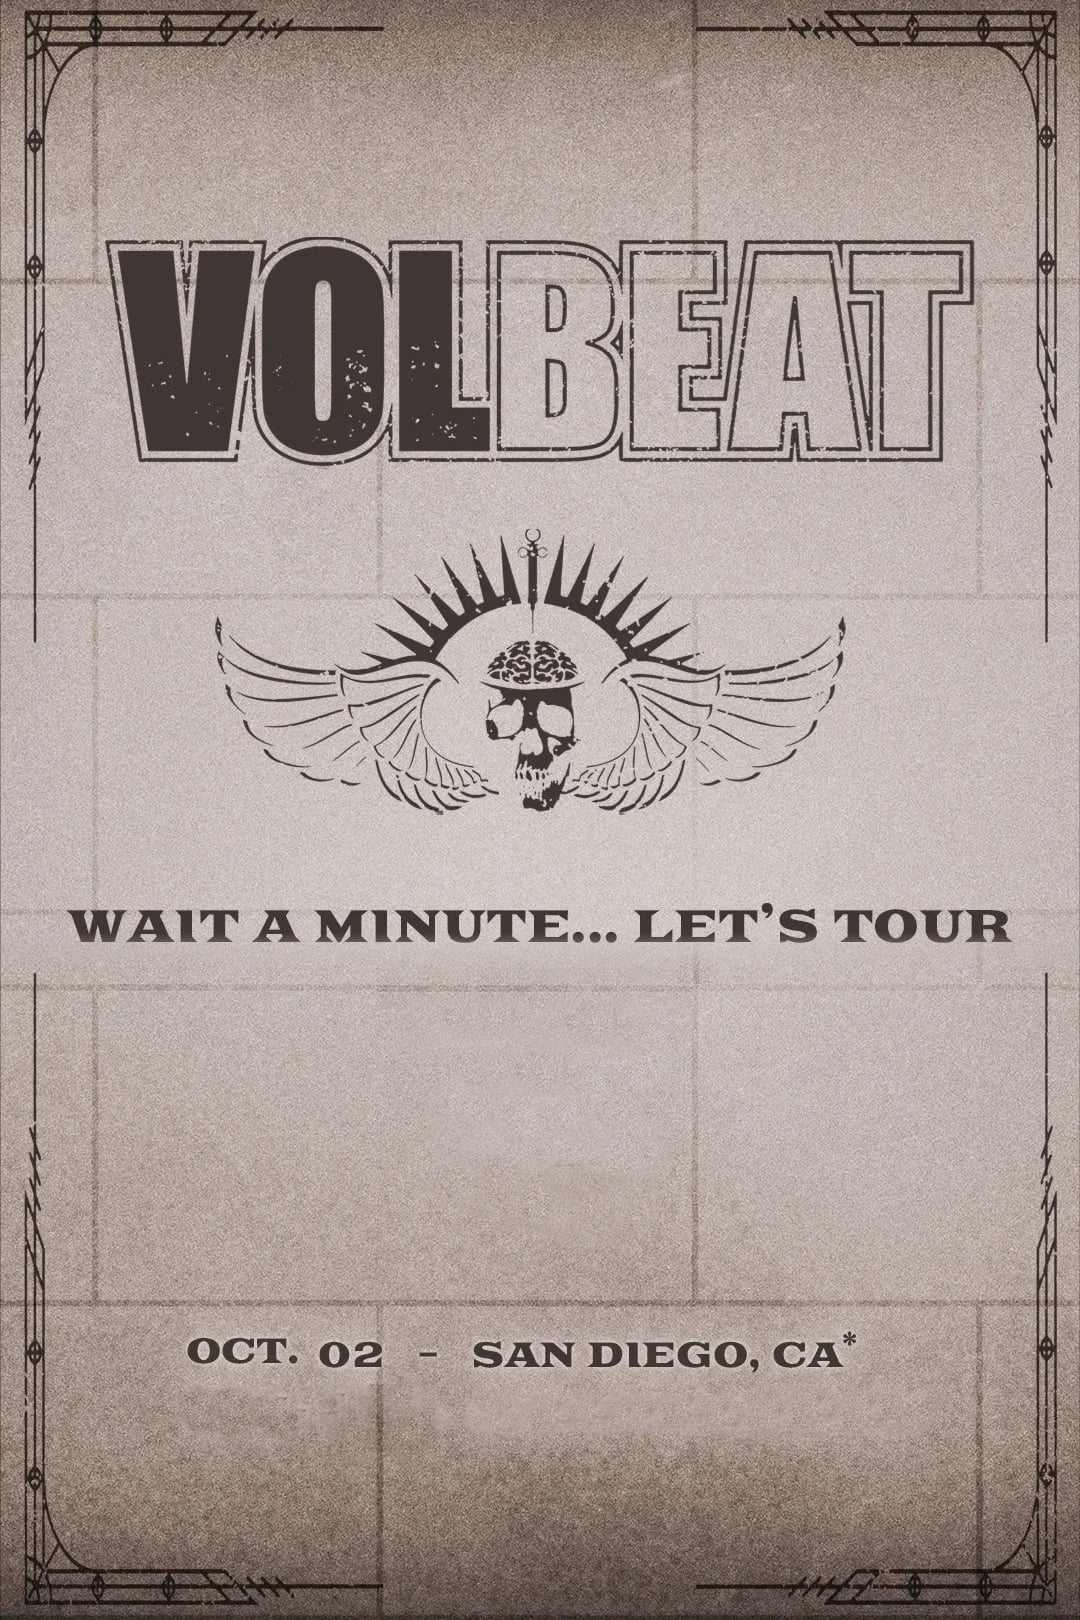 VOLBEAT - Wait A Minute… Let’s Tour! (Live in San Diego, CA)